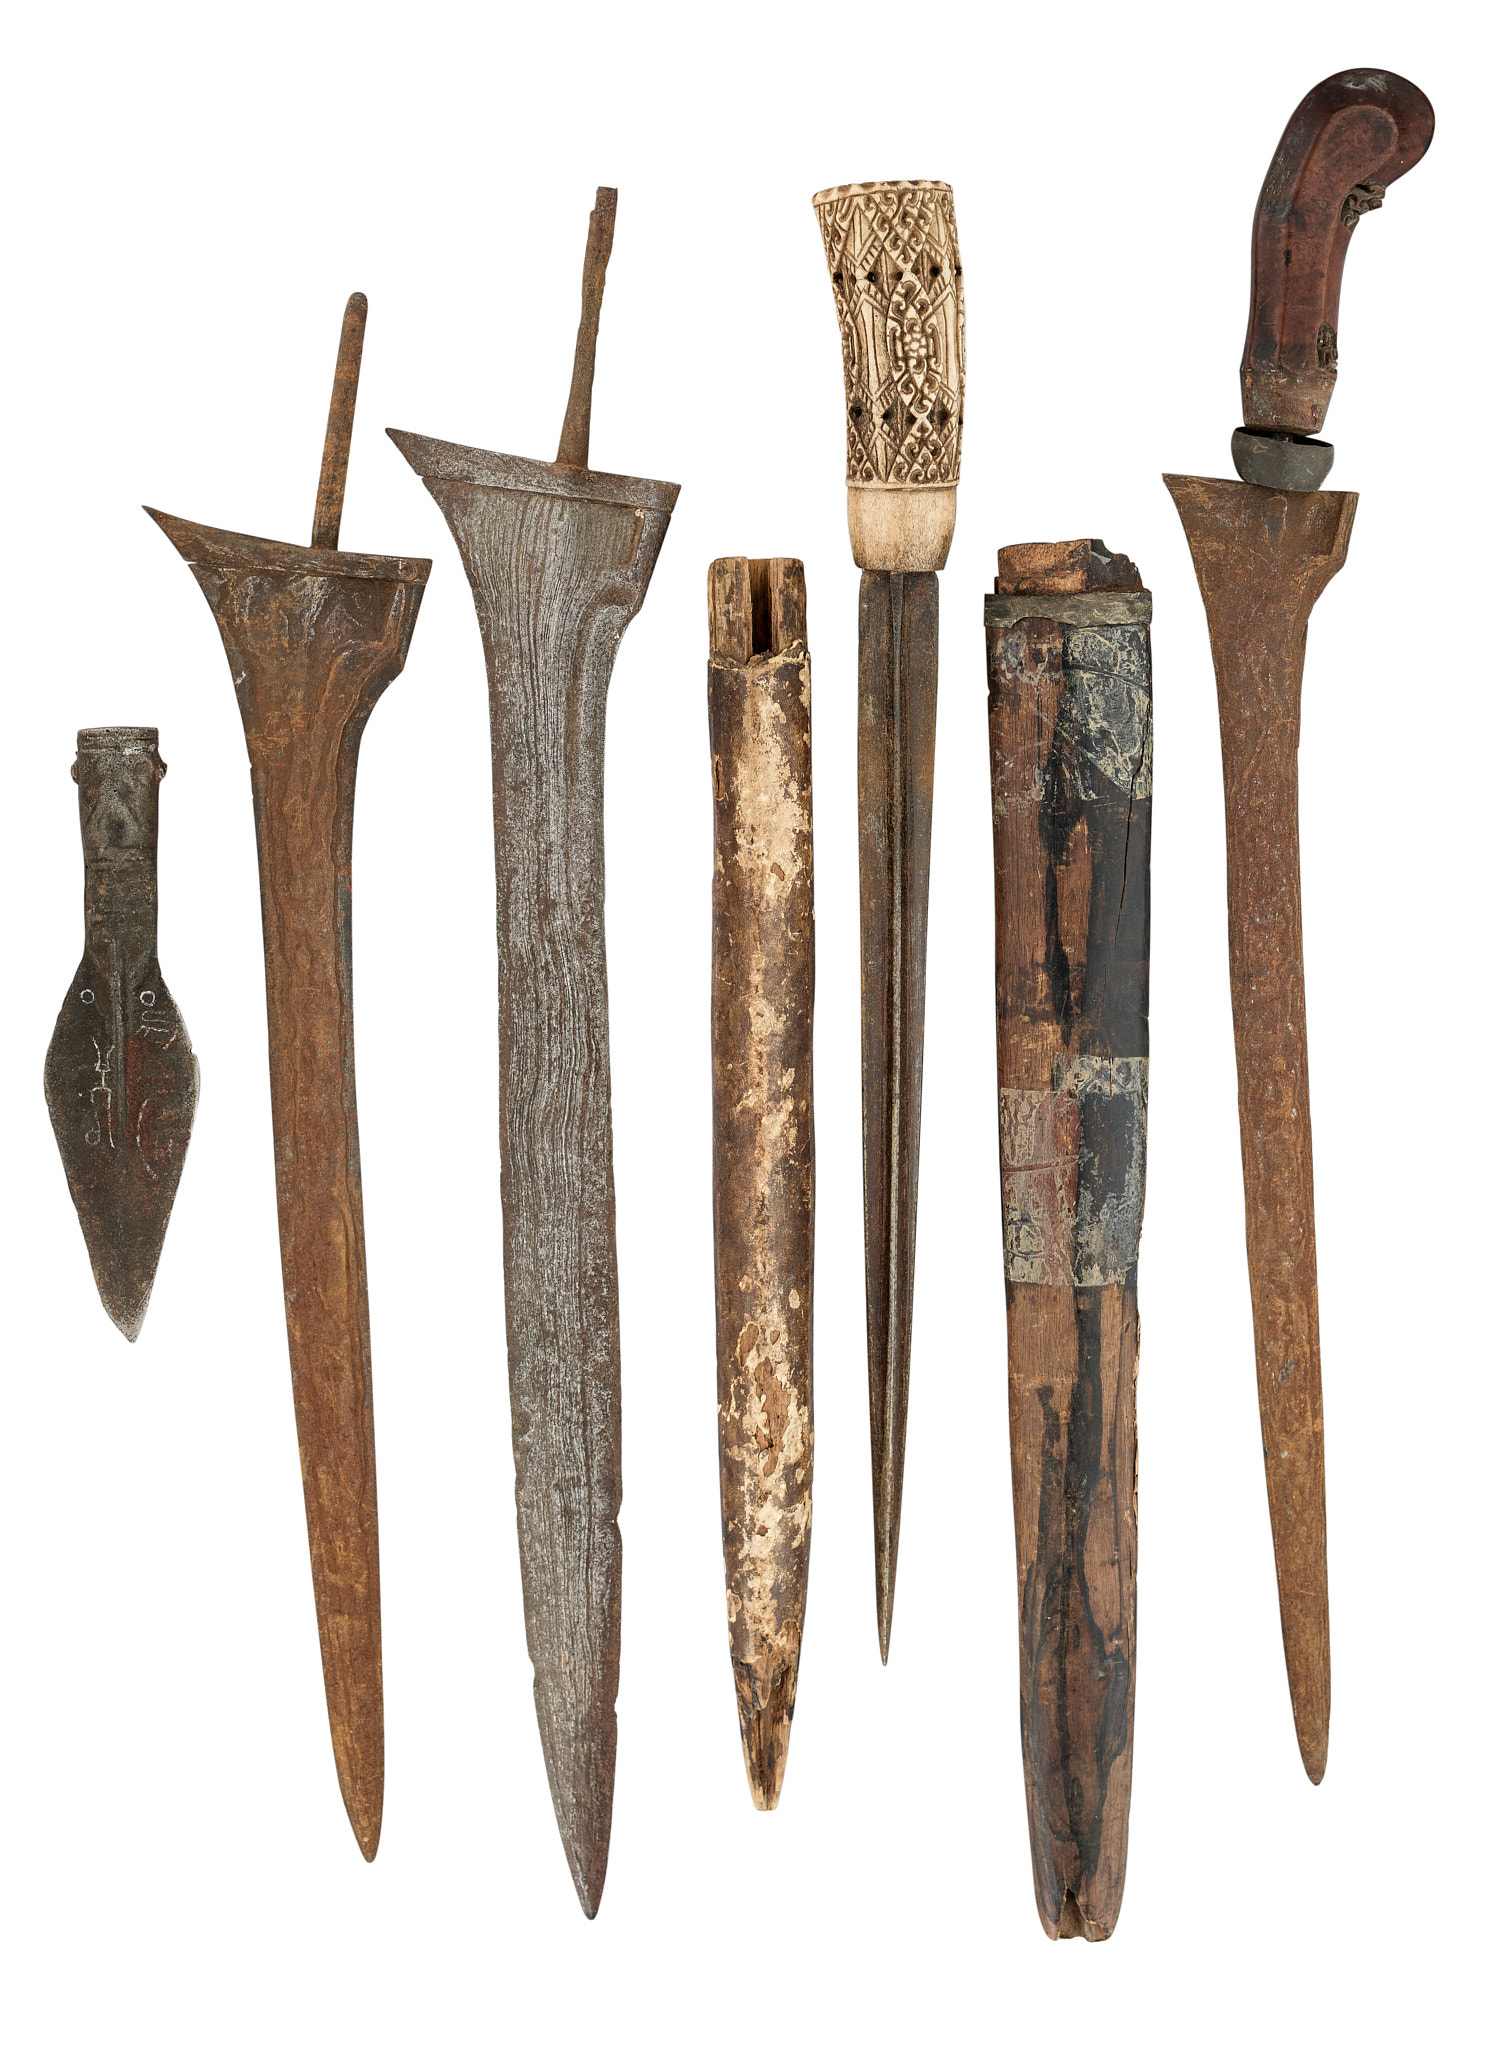 FIVE MALAYSIAN DAGGERS (KRIS), A DAGGER AND TWO SPEARHEADS, 19TH CENTURY